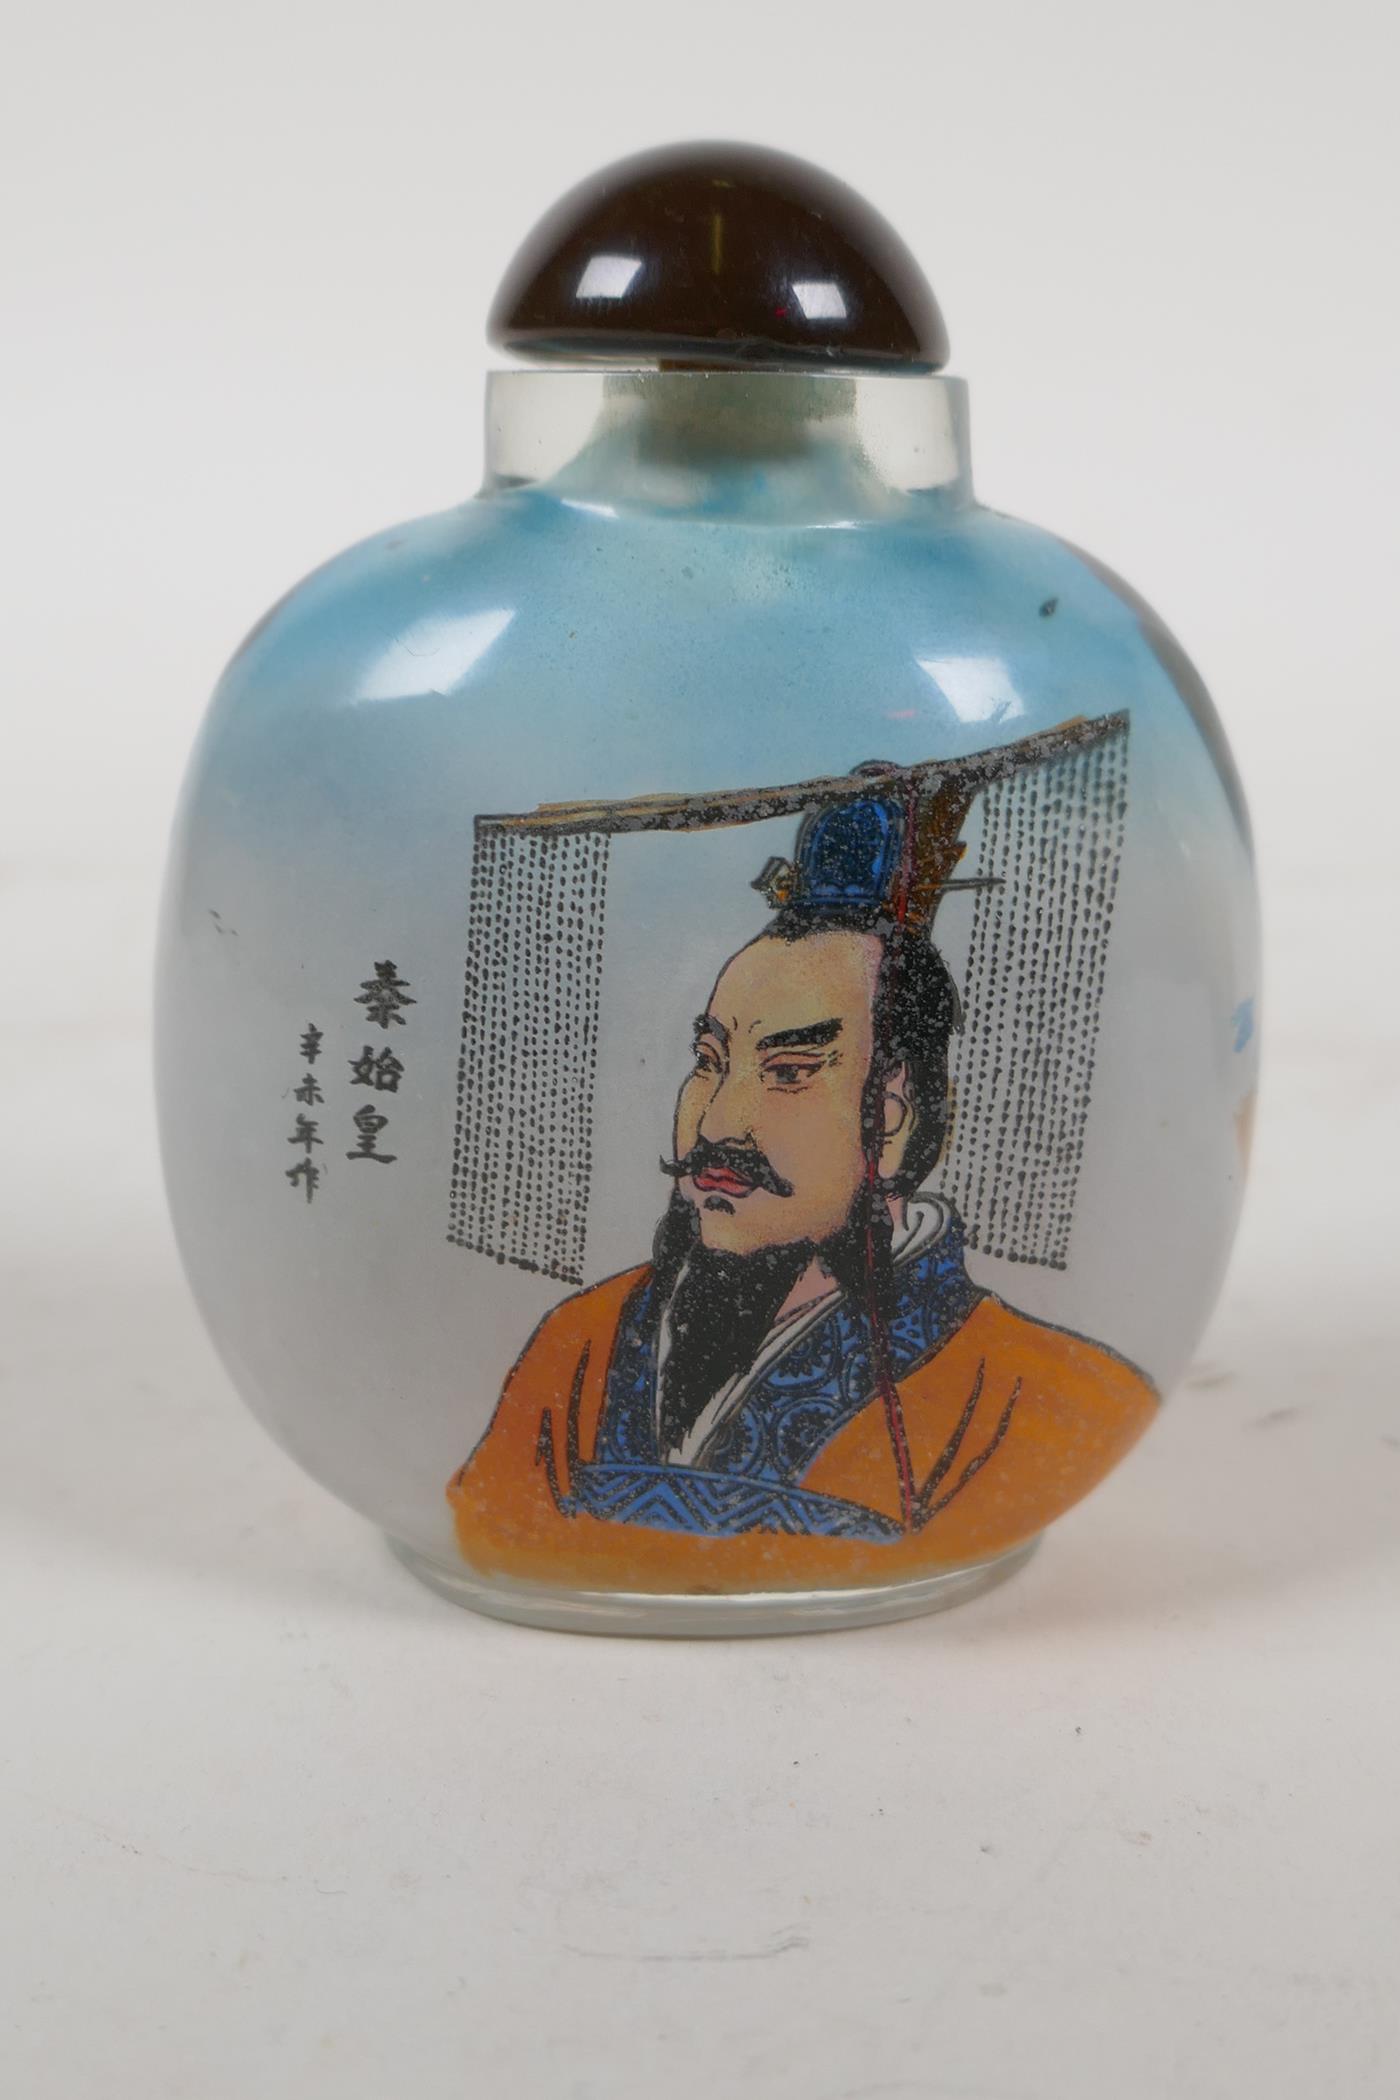 A Chinese reverse decorated glass snuff bottle depicting the great wall and a portrait of a noble, - Image 3 of 5